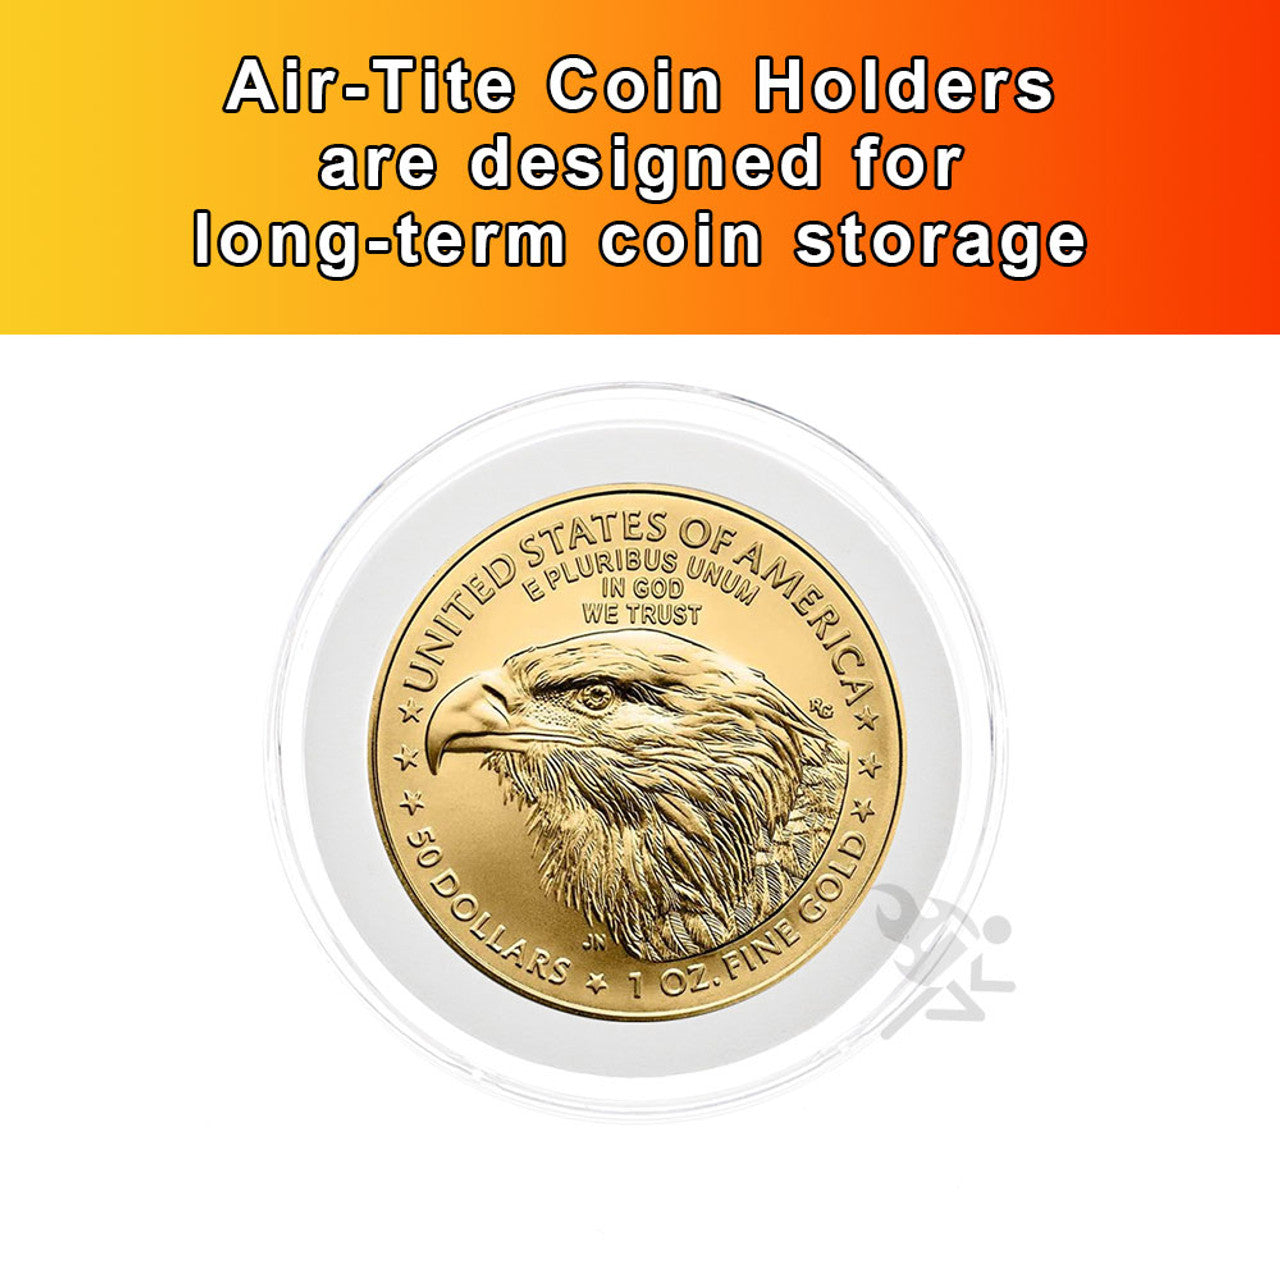 32mm Ring Fit Coin Holders for 1oz Gold Eagles